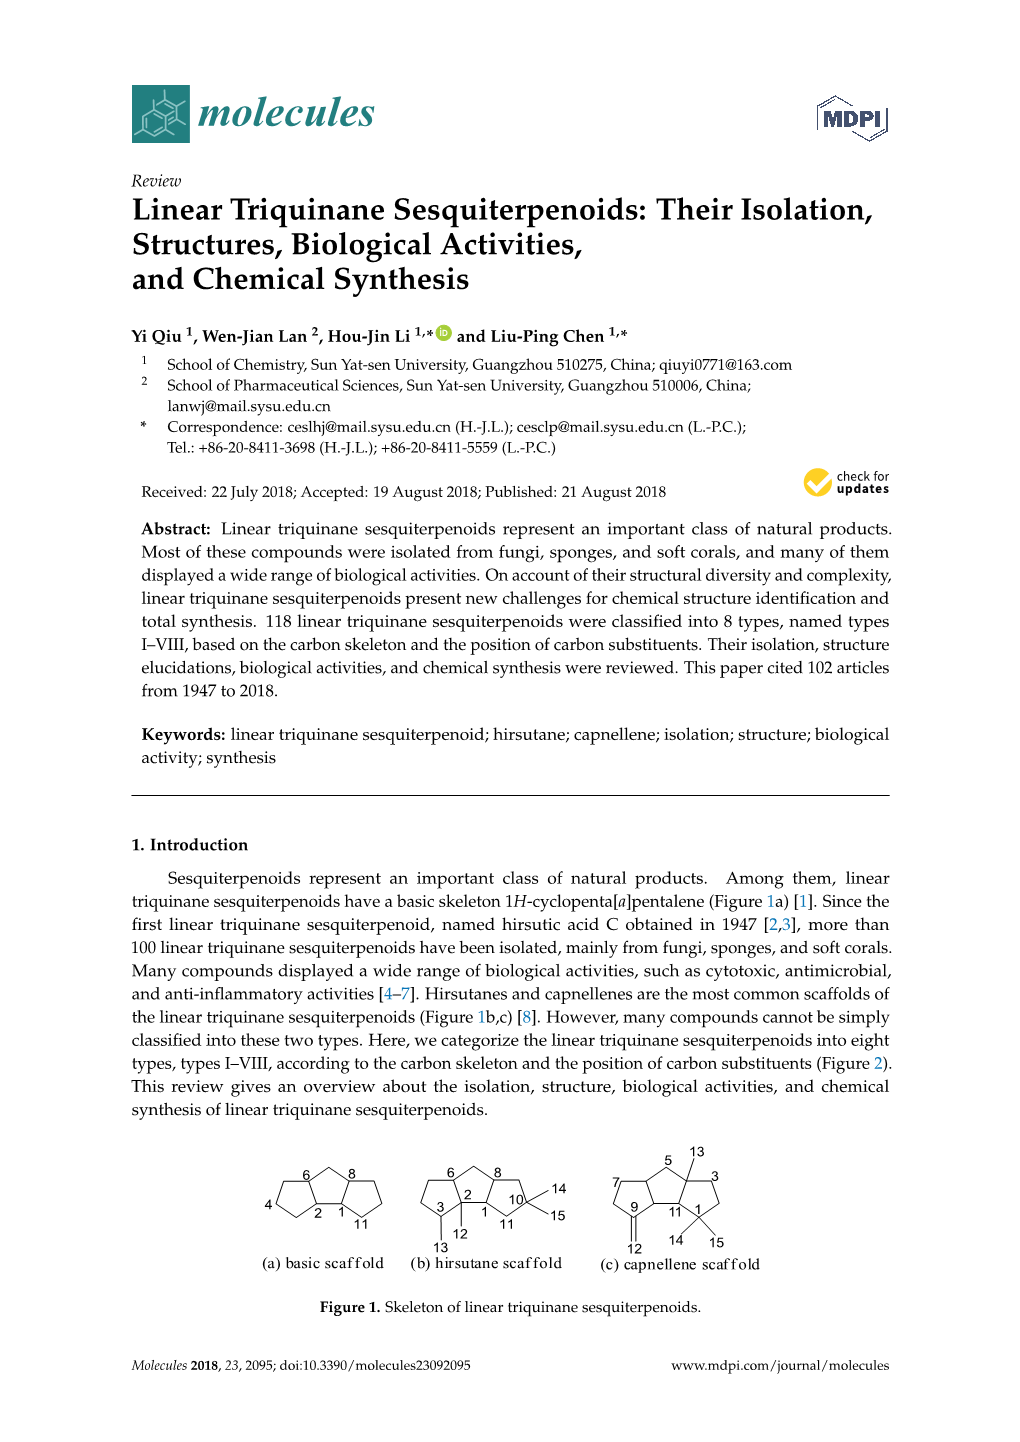 Linear Triquinane Sesquiterpenoids: Their Isolation, Structures